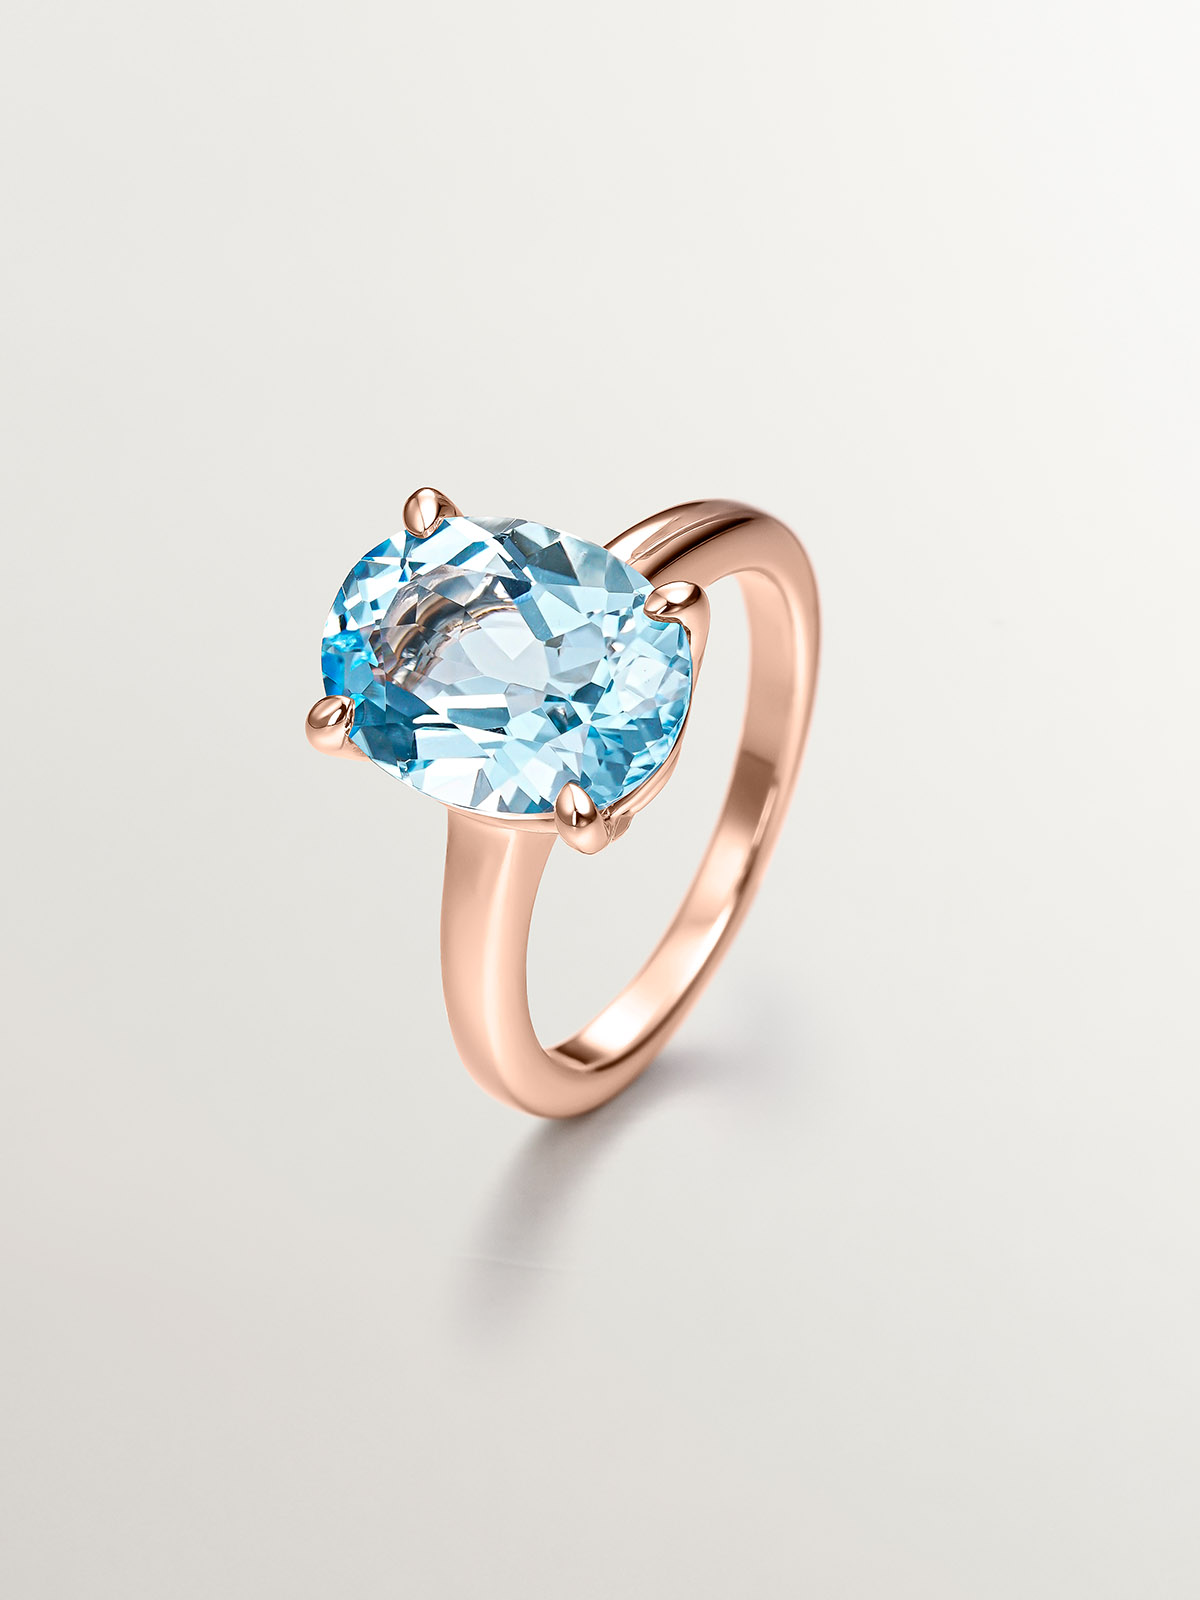 925 Silver ring coated in 18K rose gold with sky blue topaz